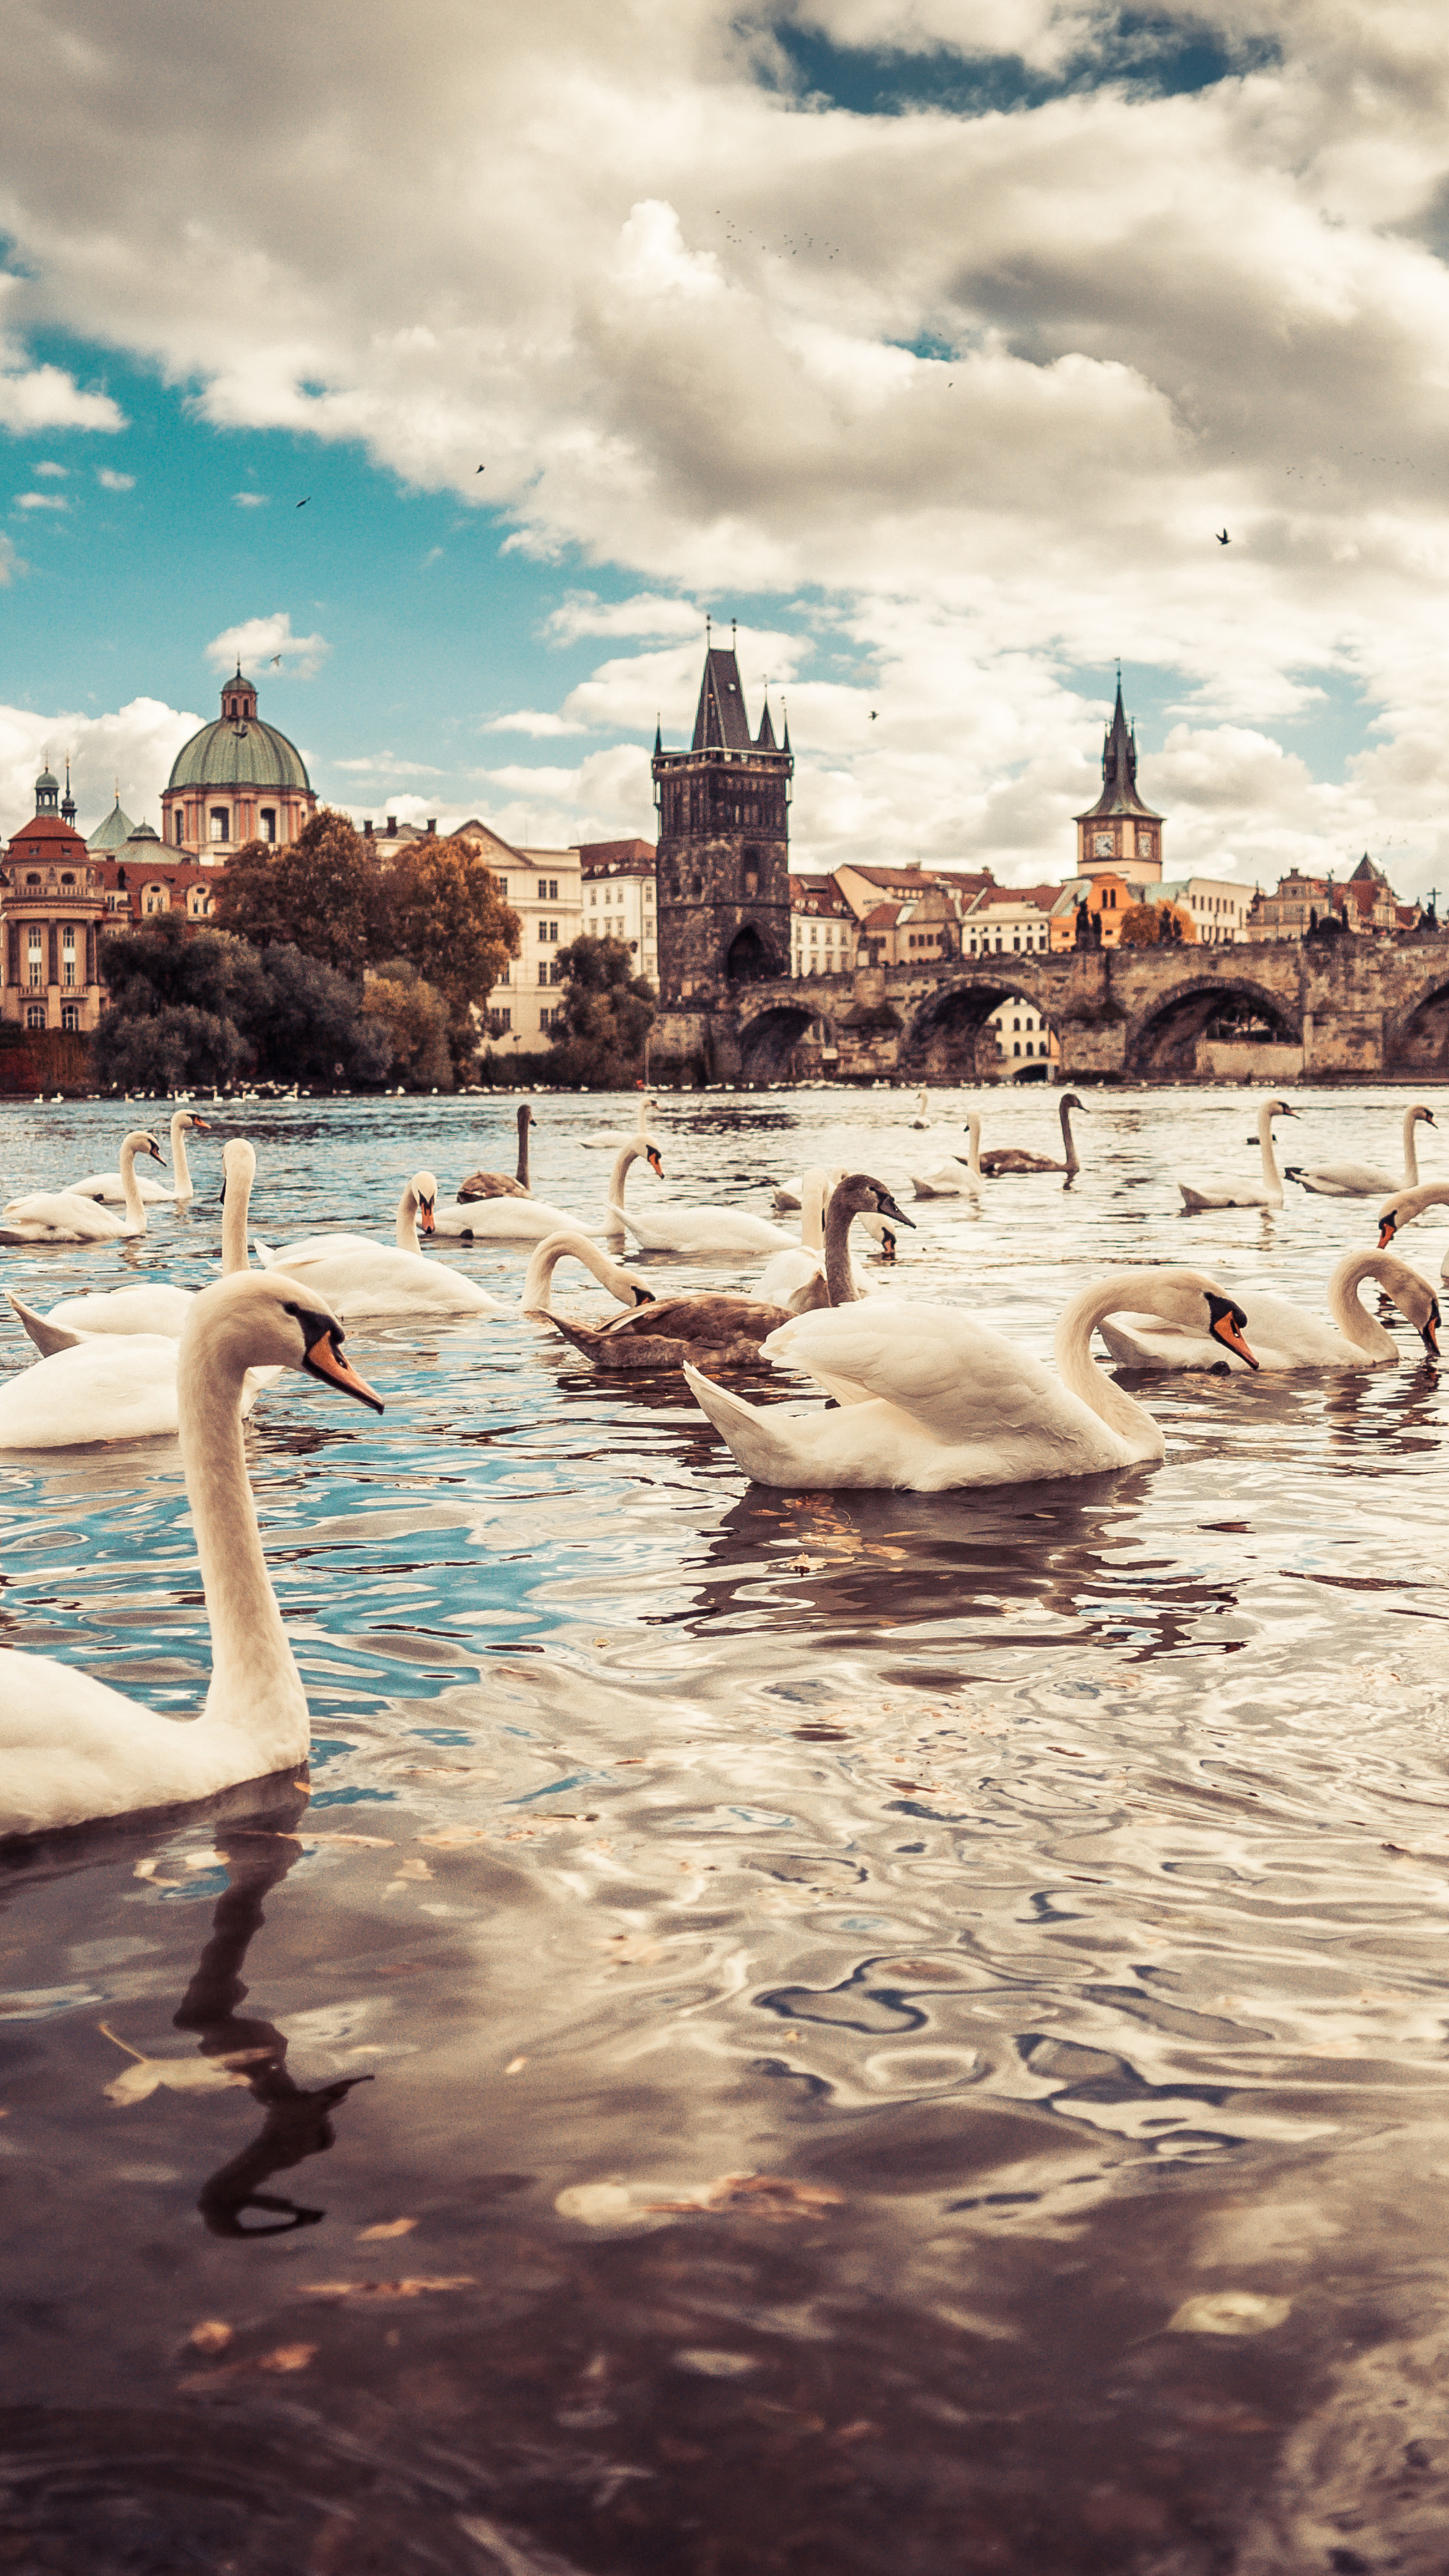 Swans on Moldau River, Czech Republic's beauty, Sony Xperia wallpapers, High-quality background, 2160x3840 4K Phone